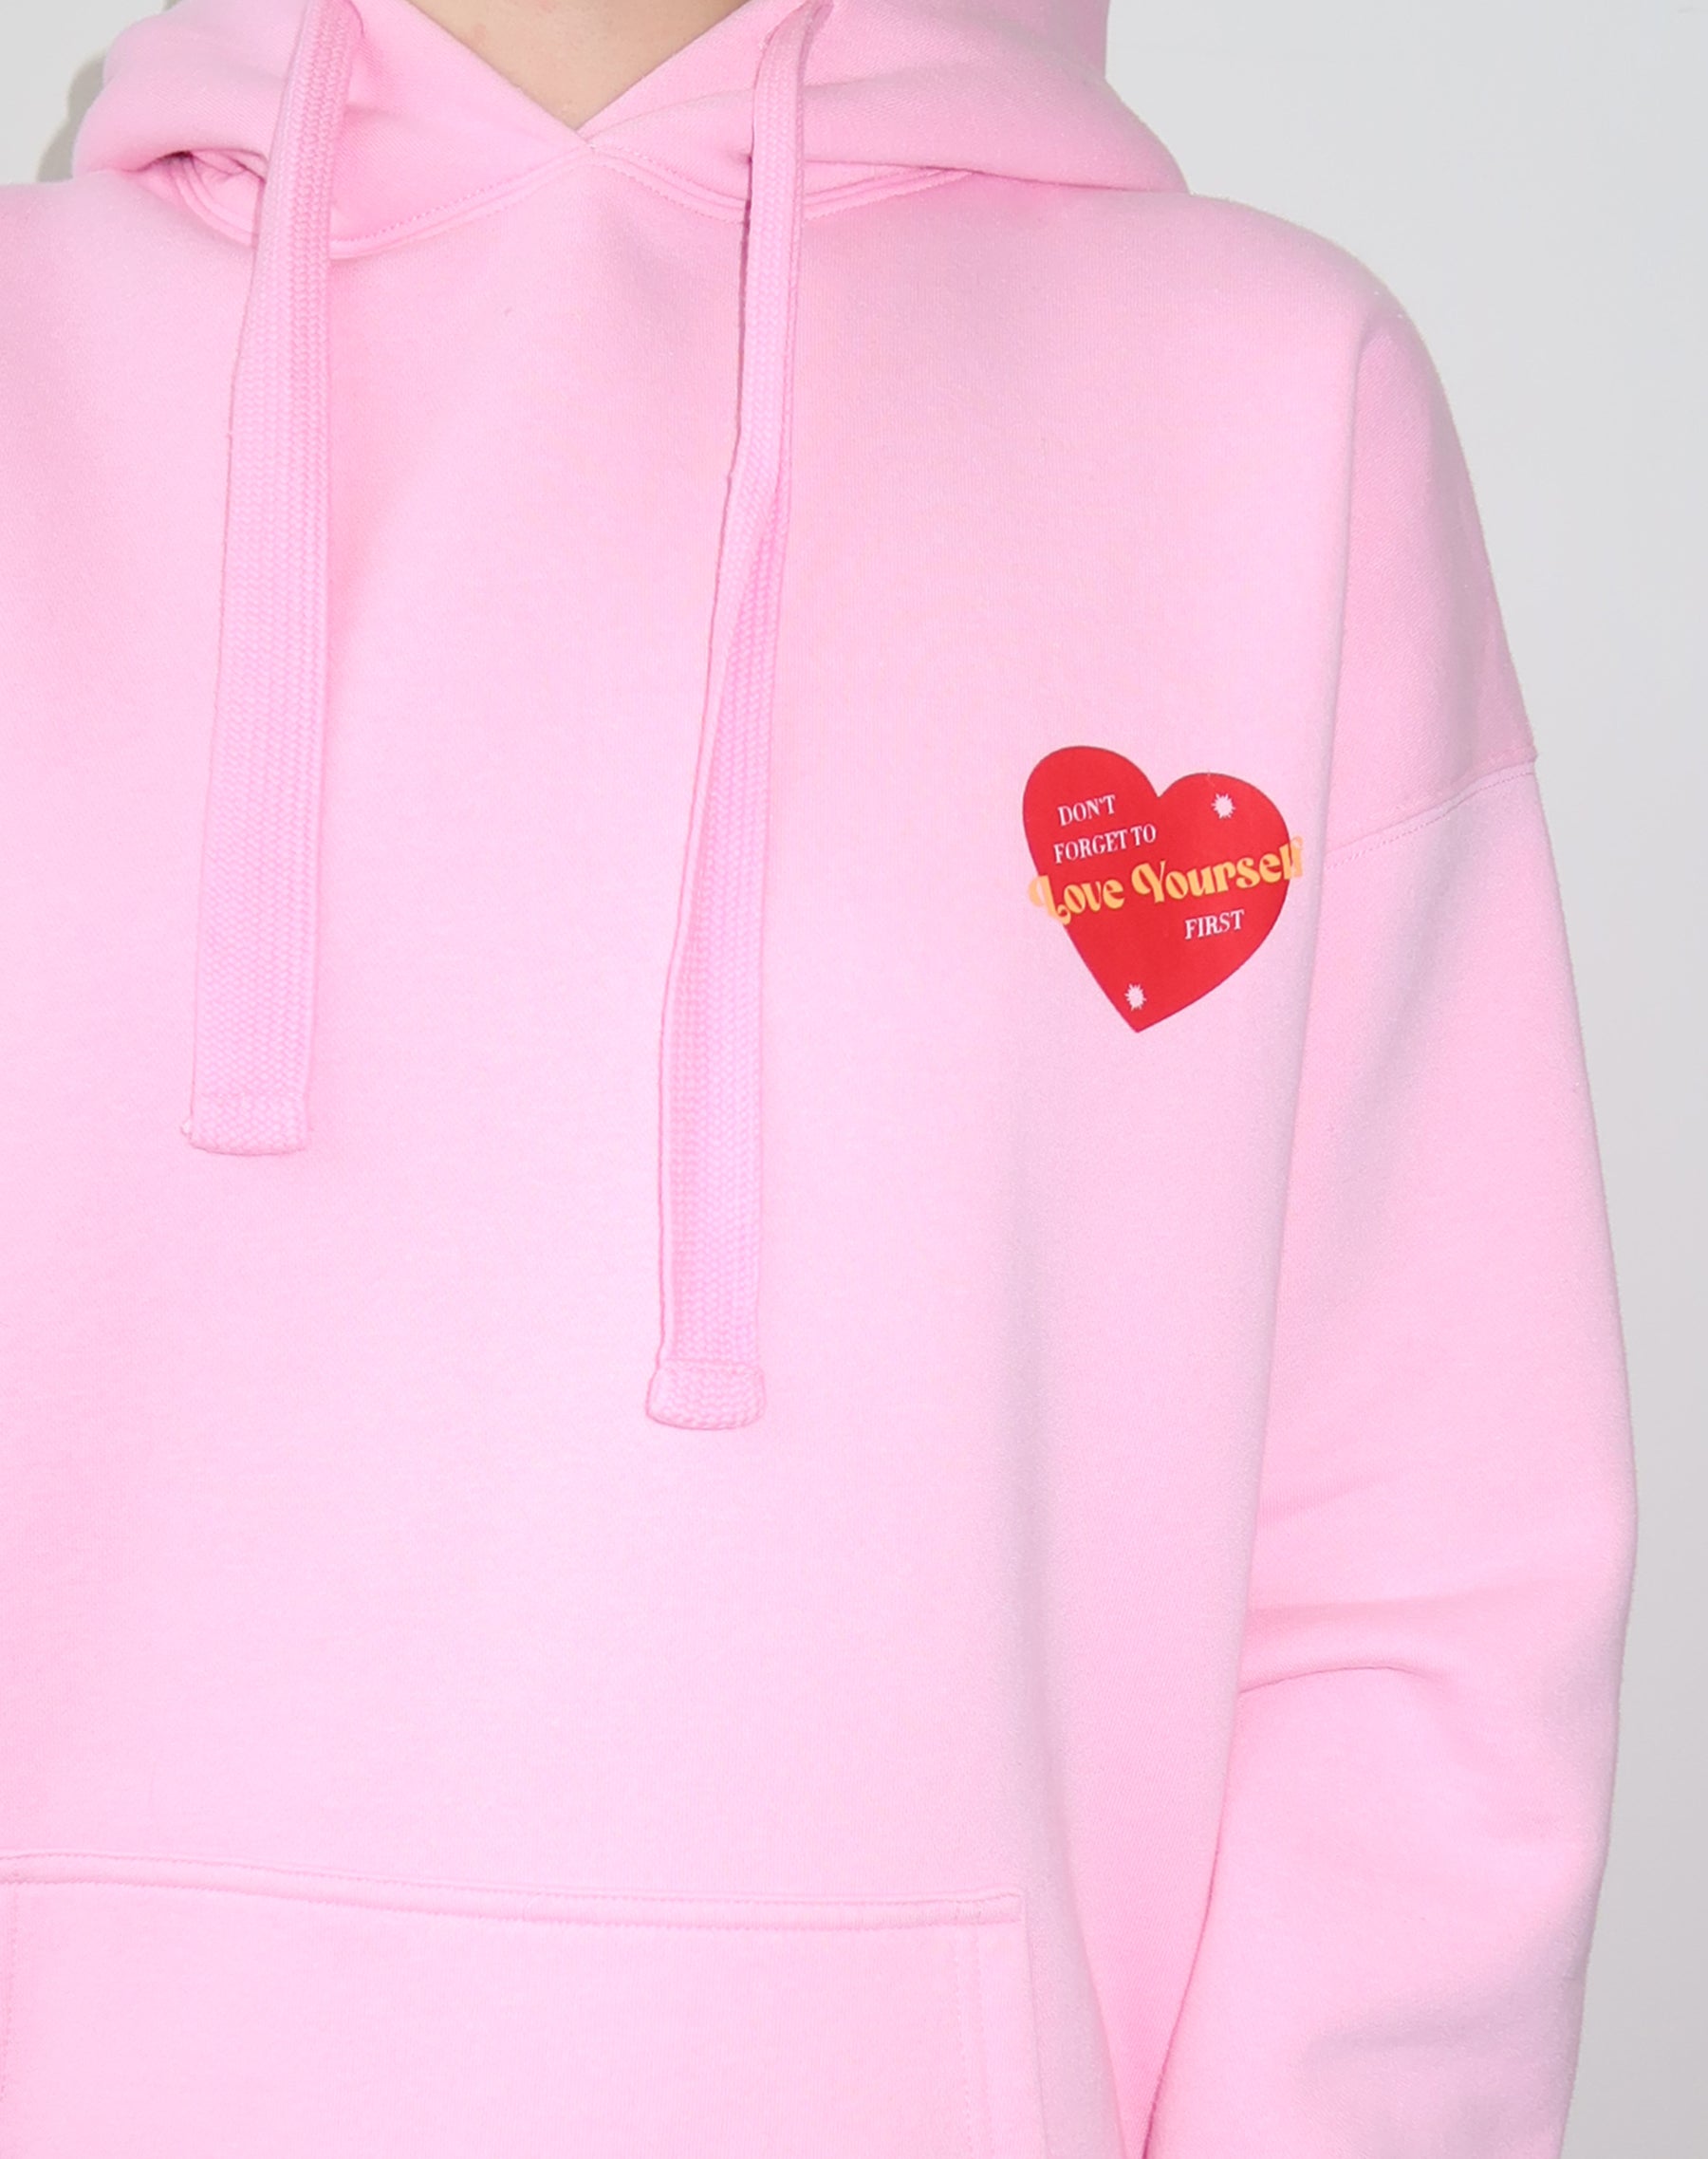 The "LOVE YOURSELF" Classic Hoodie | Baby Pink